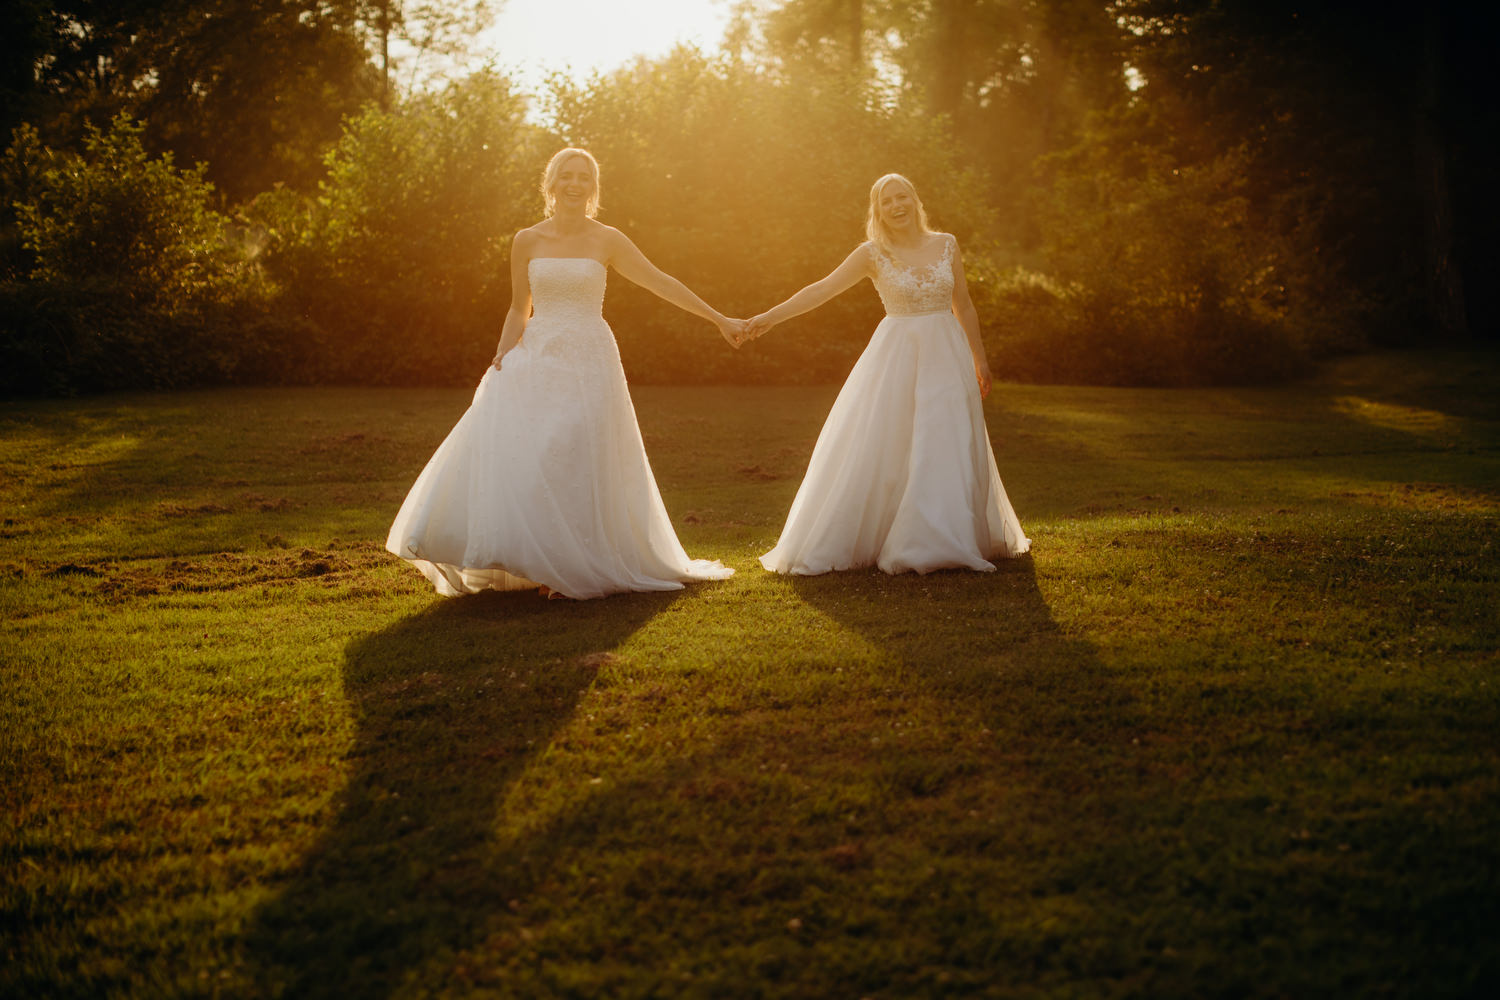 brides pose for photographs at sunset